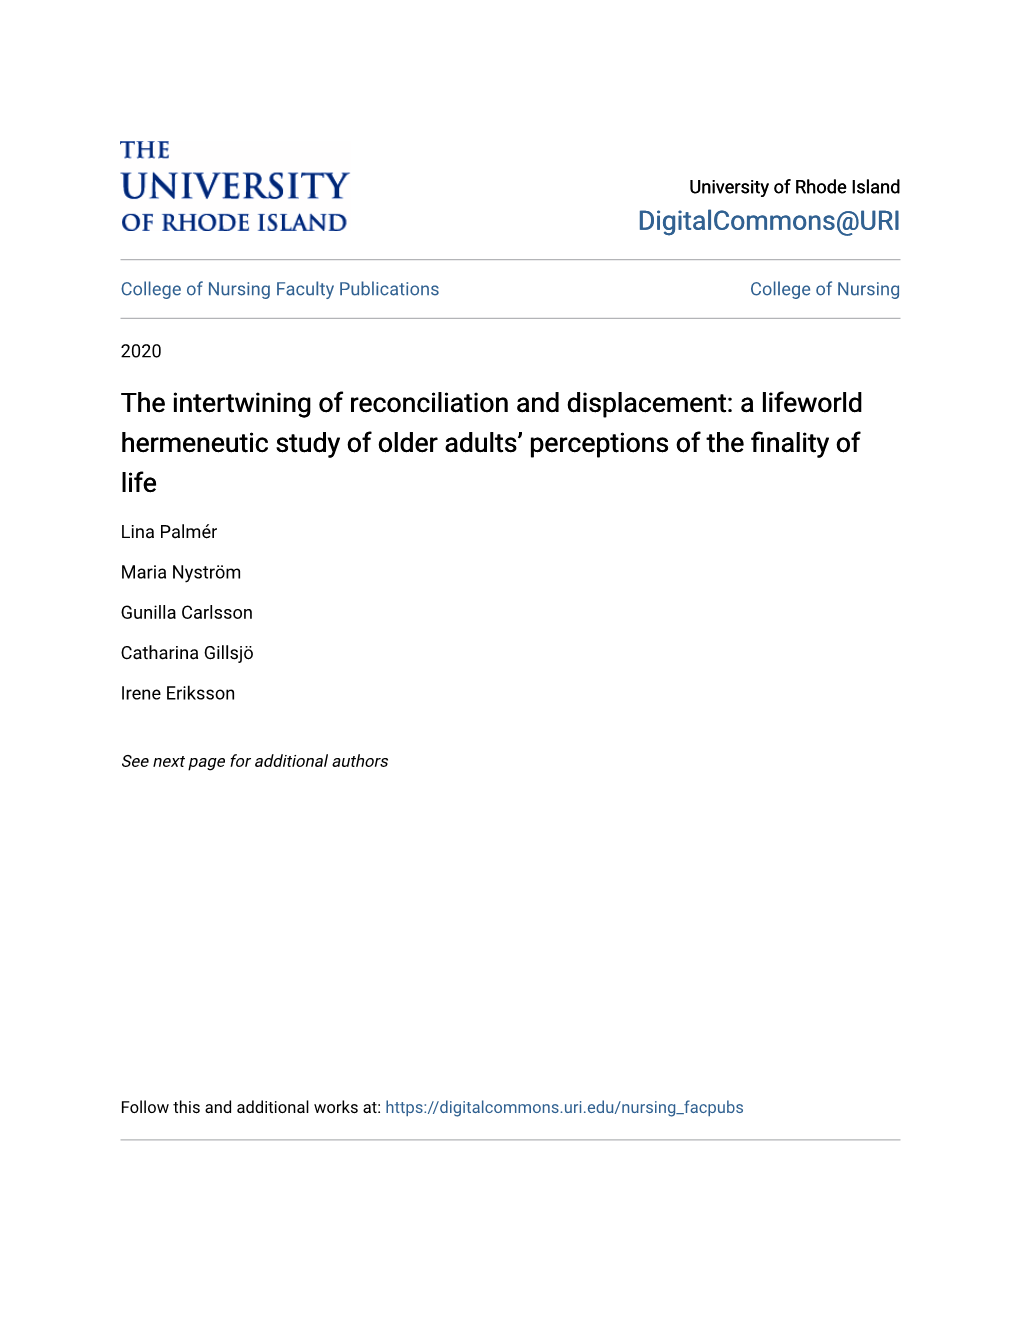 The Intertwining of Reconciliation and Displacement: a Lifeworld Hermeneutic Study of Older Adults’ Perceptions of the Finality of Life